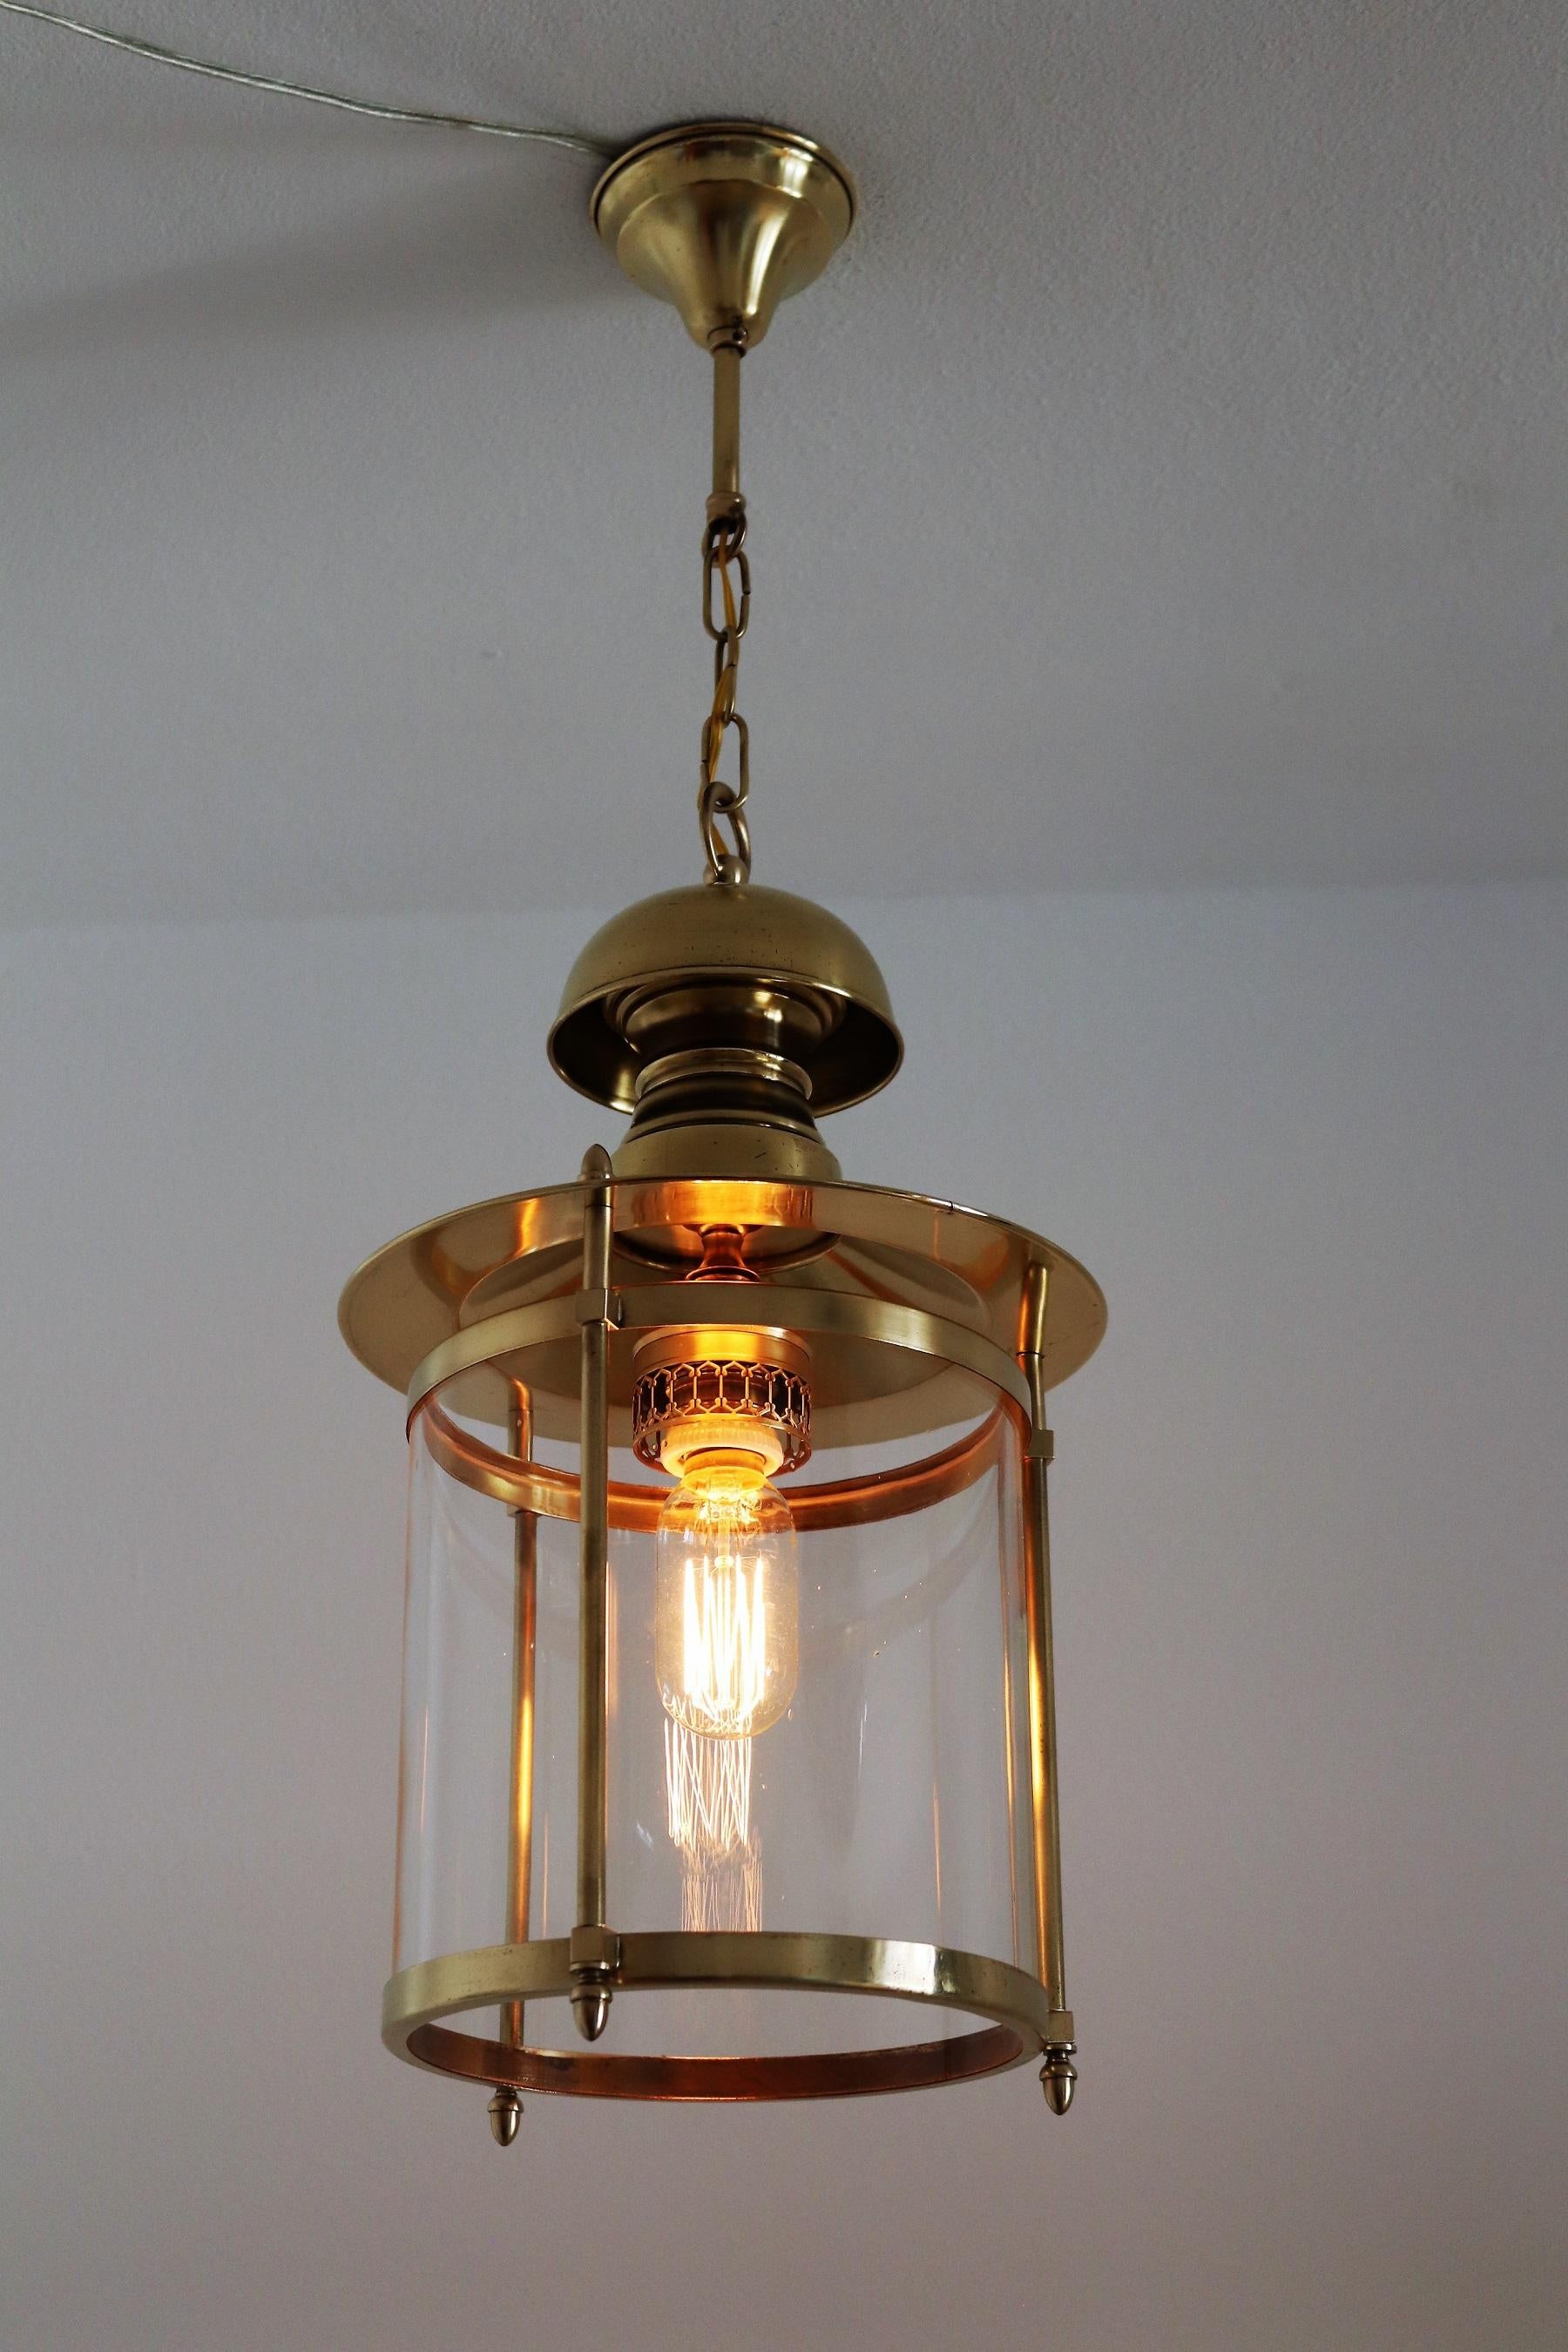 Italian Midcentury Brass and Glass Pendant Lamp or Lantern, 1970s For Sale 2